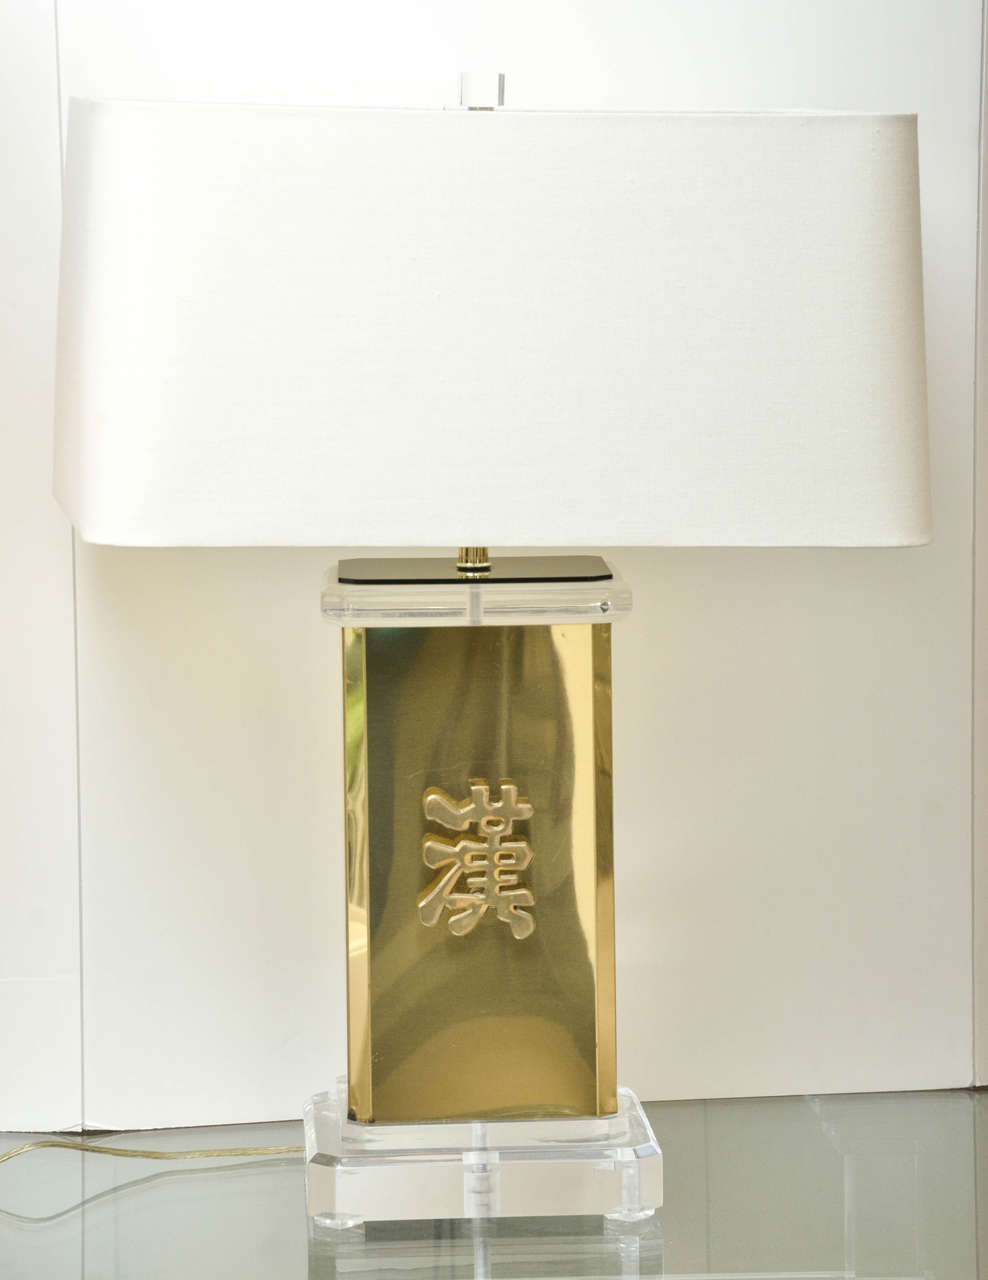 Attractive pair of brass and Lucite lamps with Asian motif attributed to James Mont.